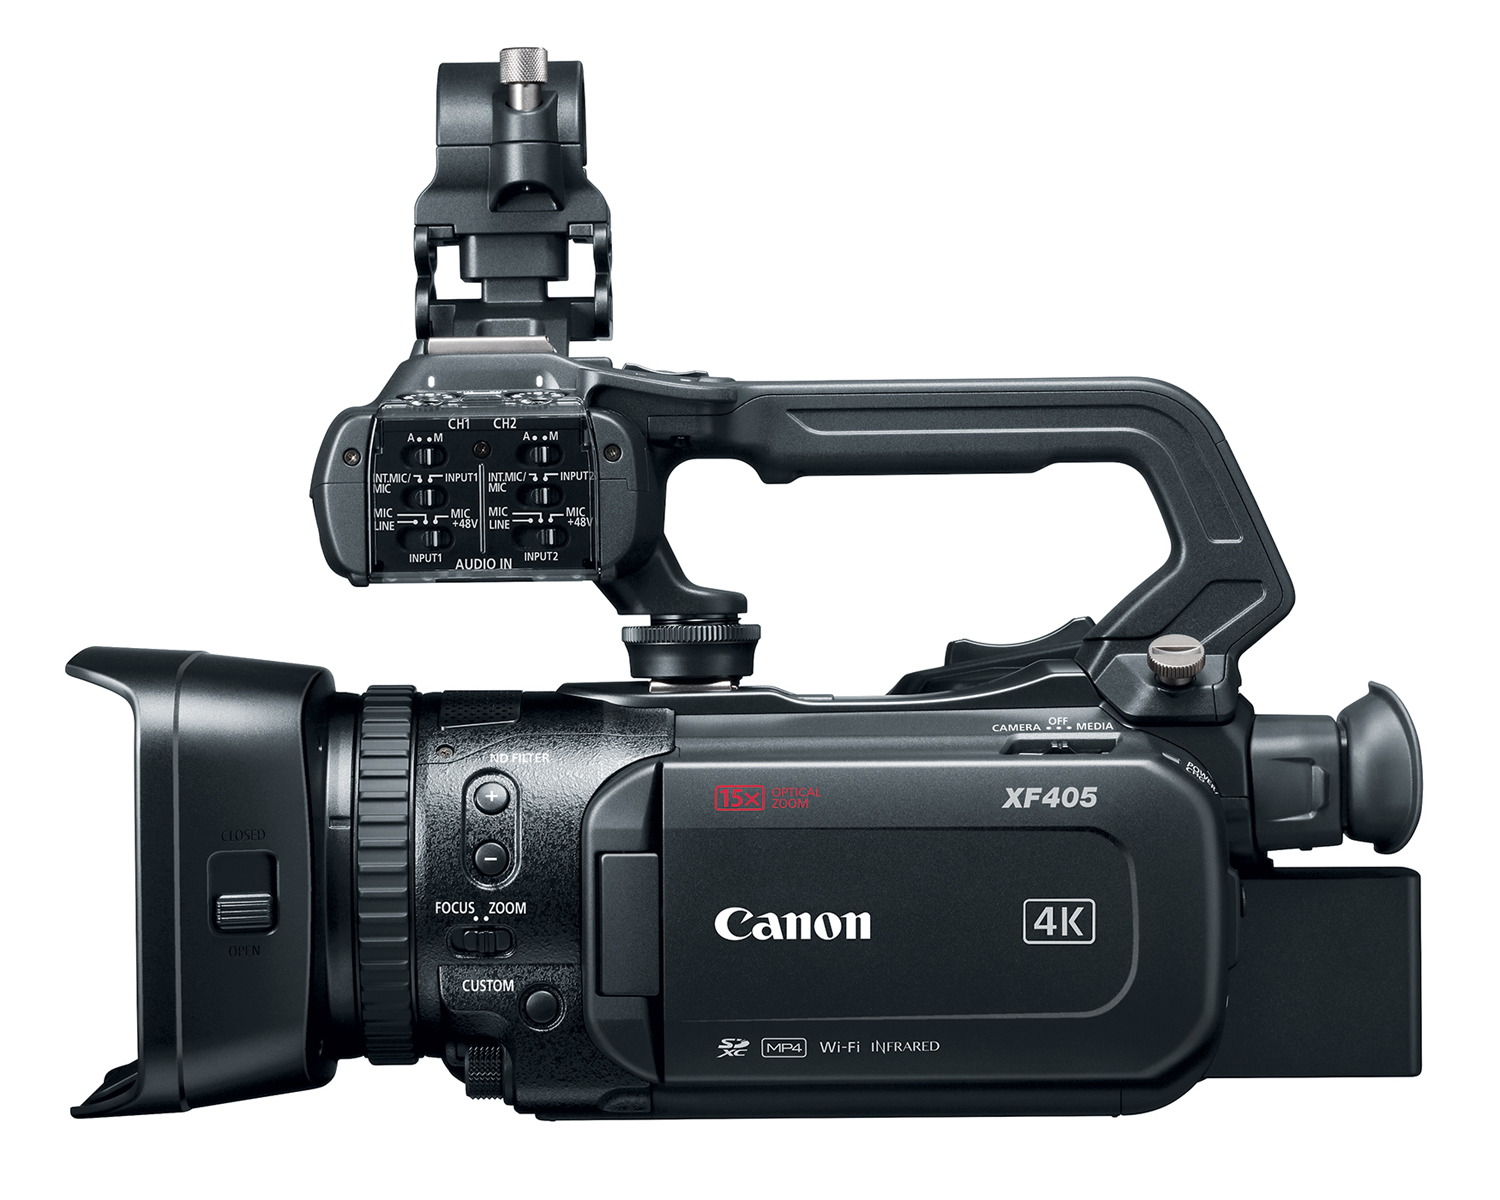 Canon XF405 side view